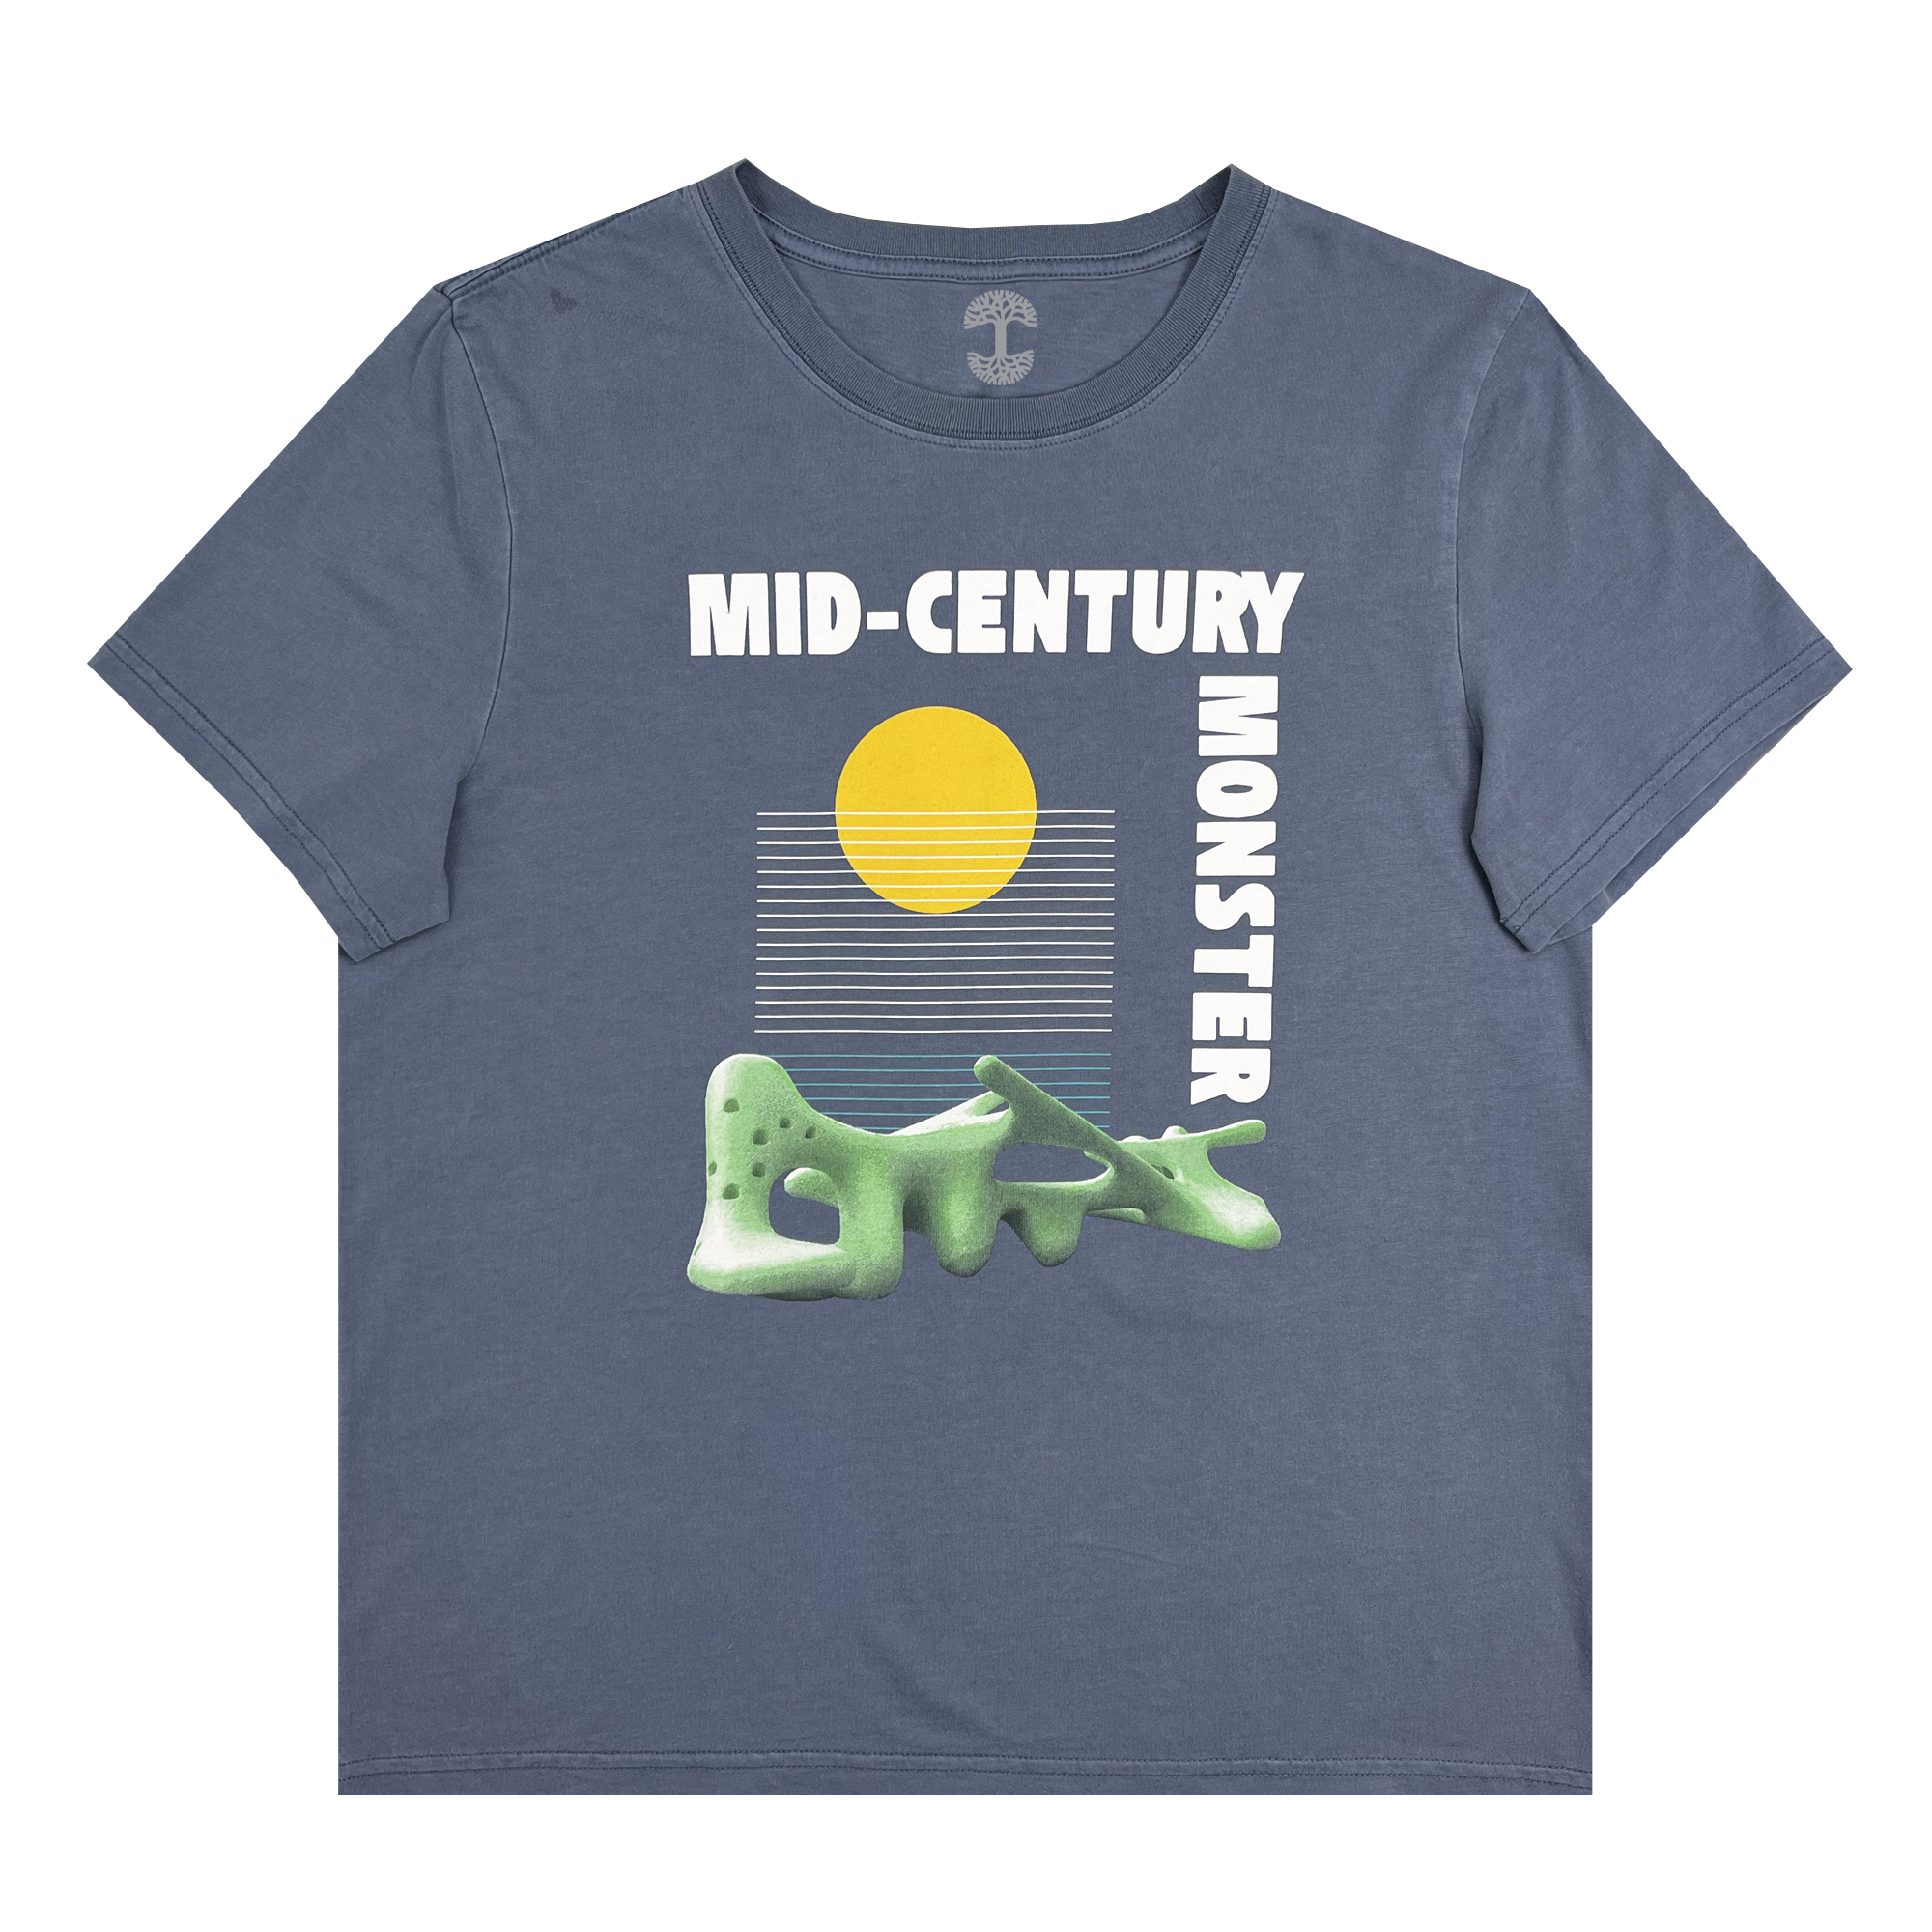 Faded blue women’s t-shirt with the mid-century monster graphic from Oaklands Marci Iron Works on the front chest.